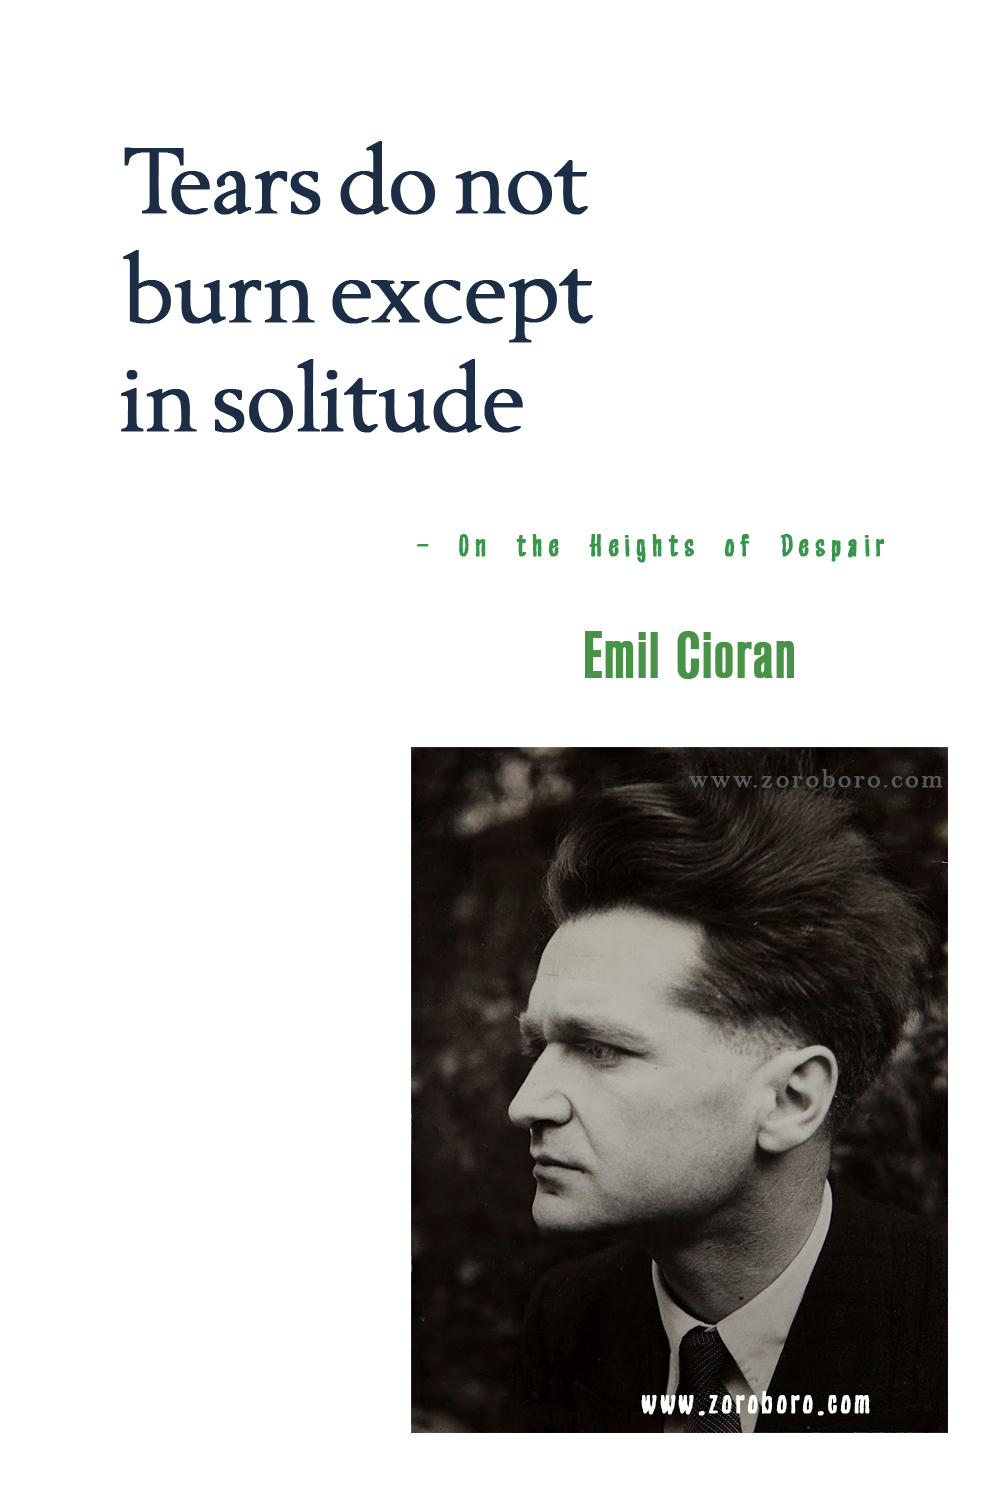 Emil Cioran Quotes, Emil Cioran Philosophy, Emil Cioran Books Quotes, Emil Cioran The Trouble with Being Born (book), On the Heights of Despair Quotes.